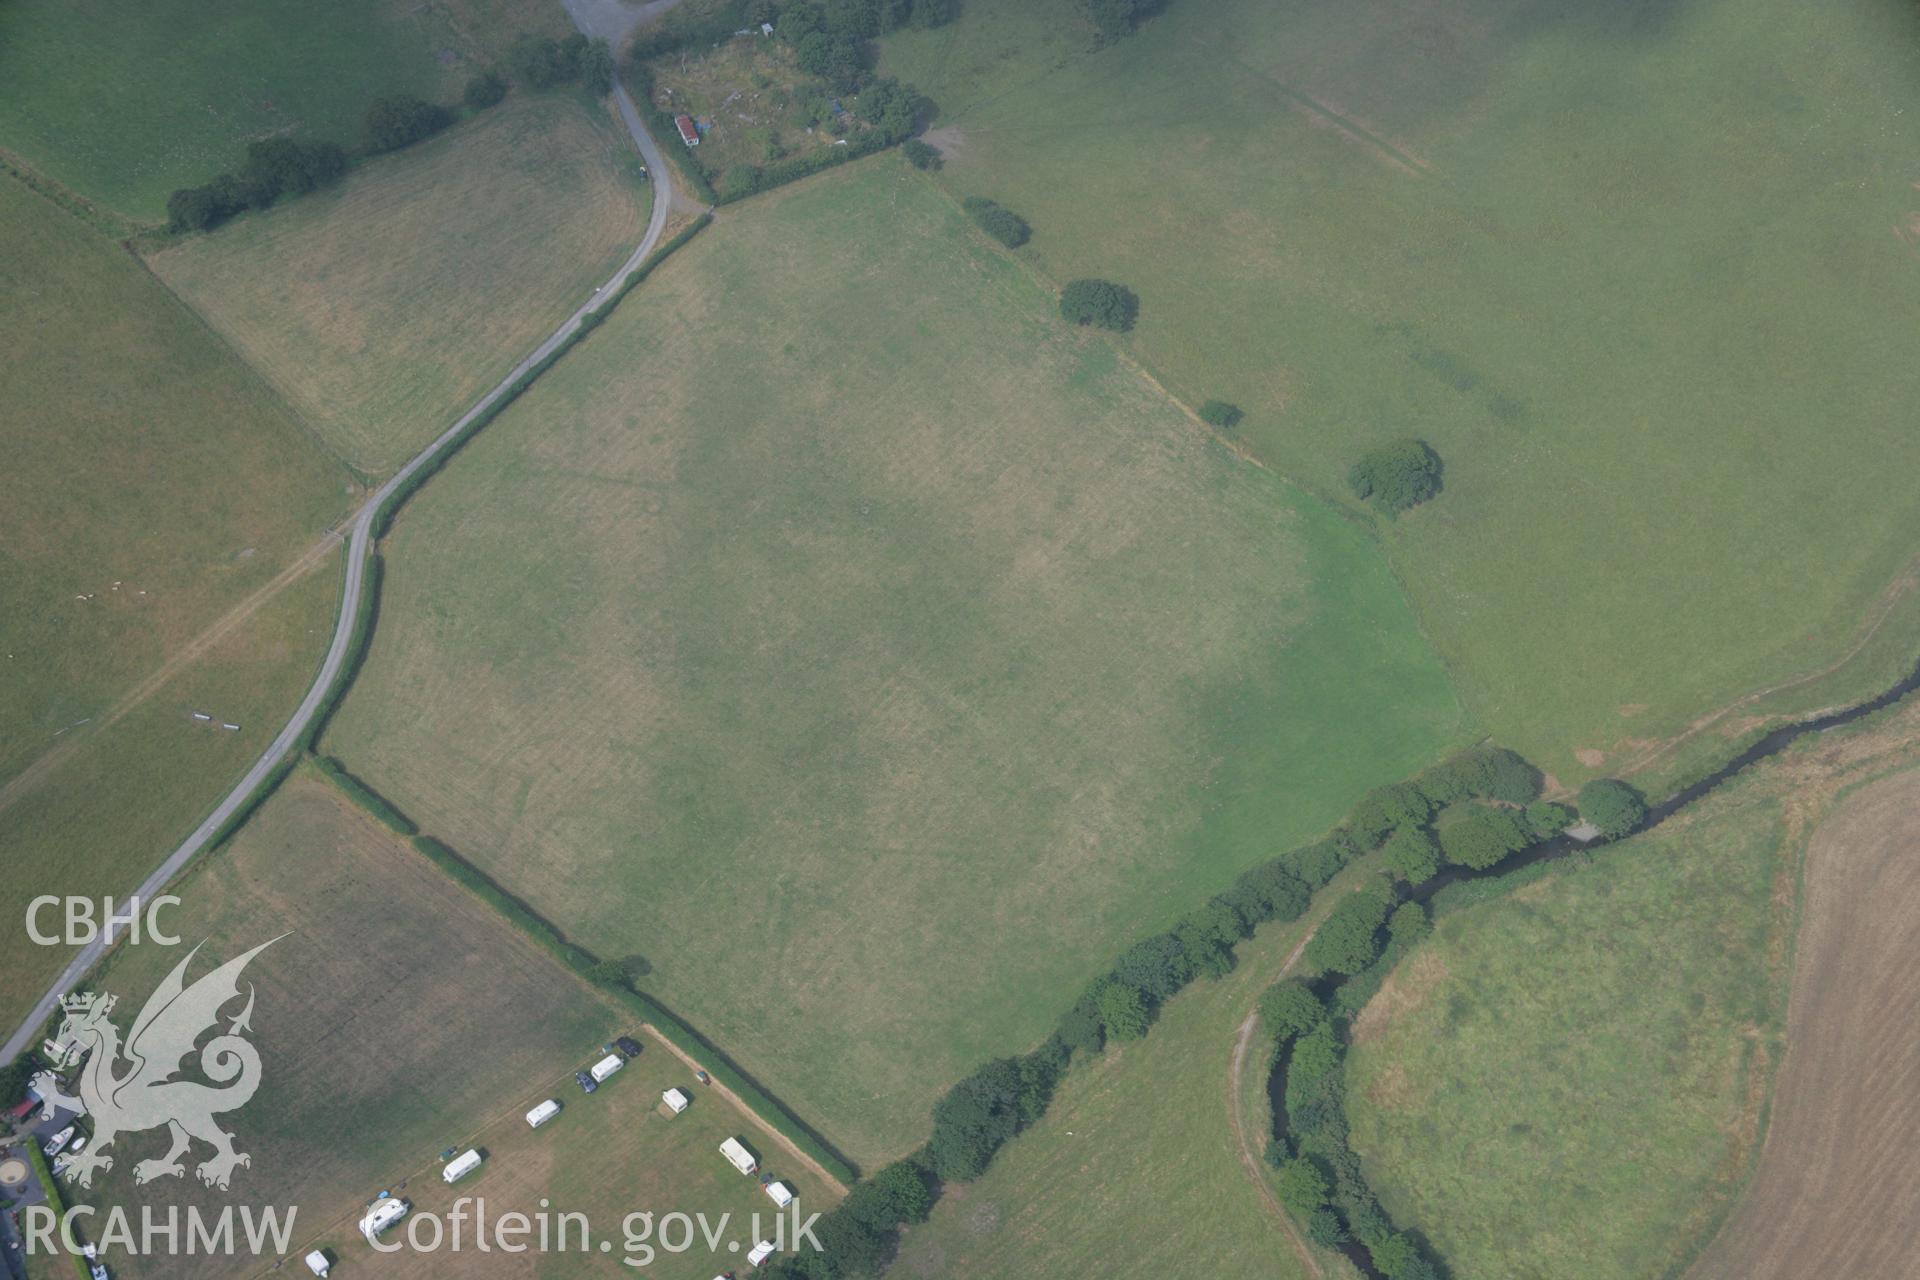 RCAHMW colour oblique aerial photograph of the south-western area of the Bryn-Crug Cropmark Complex. Taken on 21 July 2006 by Toby Driver.